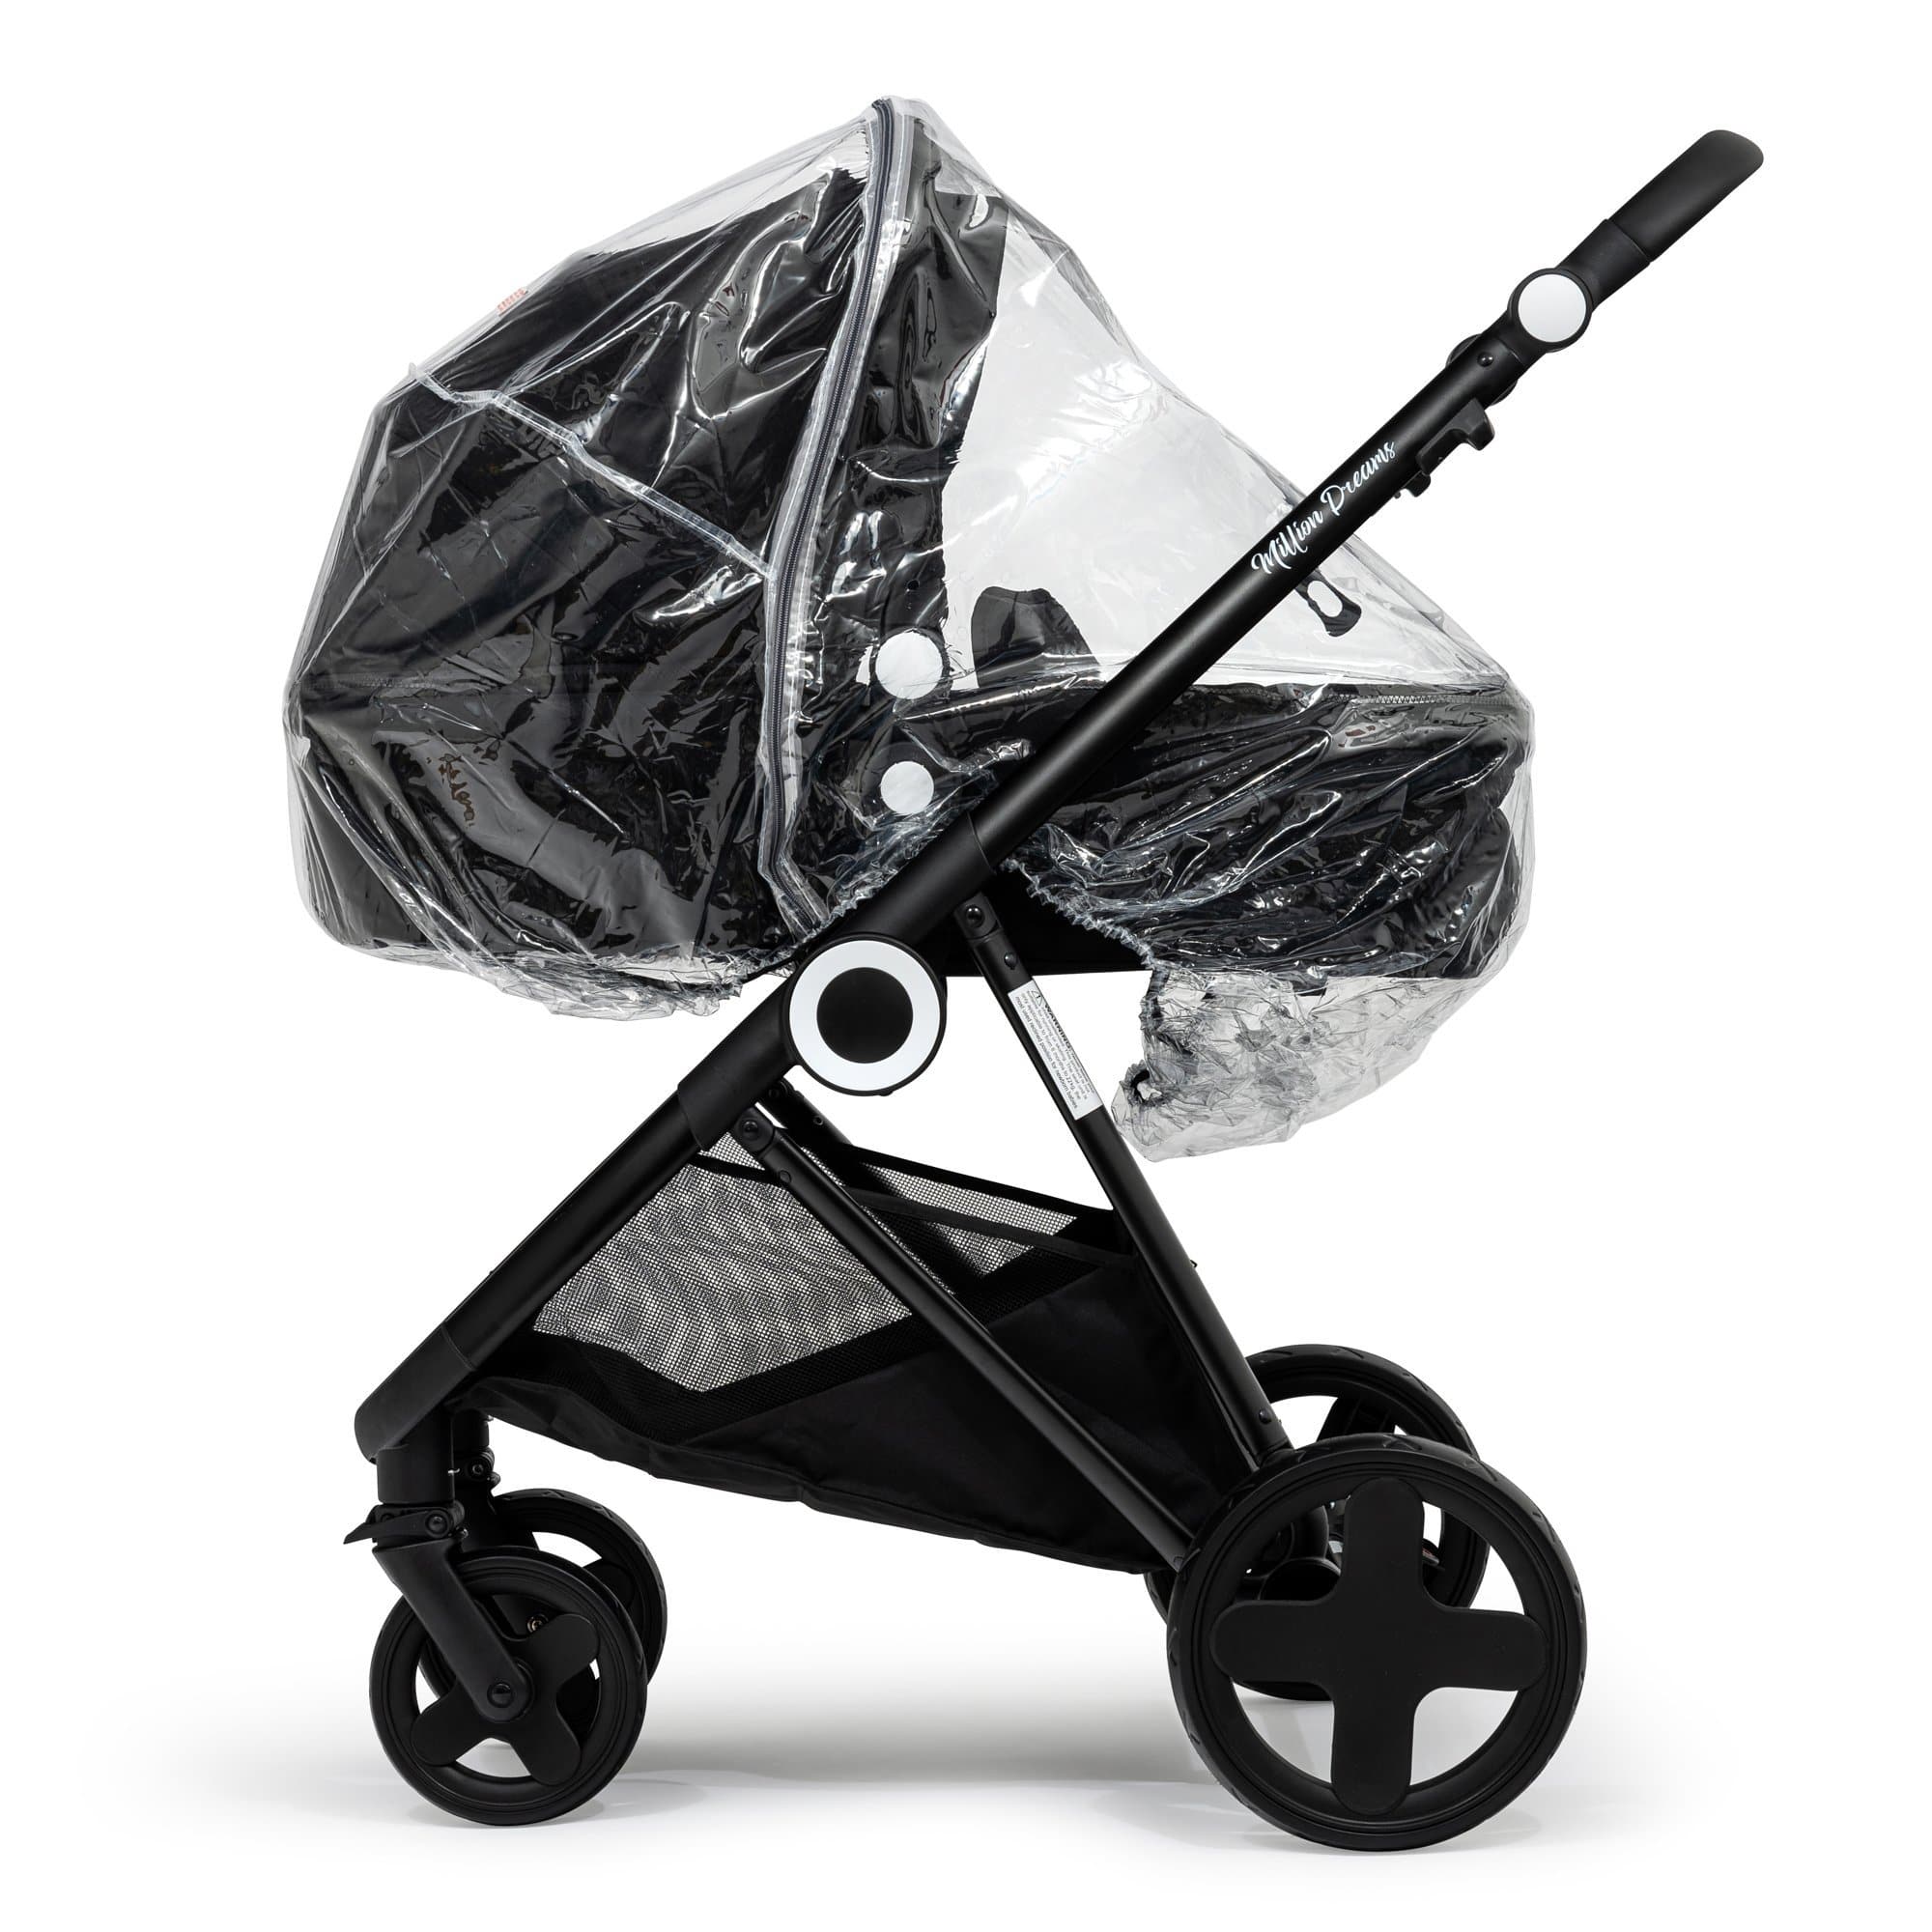 2 in 1 Rain Cover Compatible with Britax - Fits All Models - For Your Little One